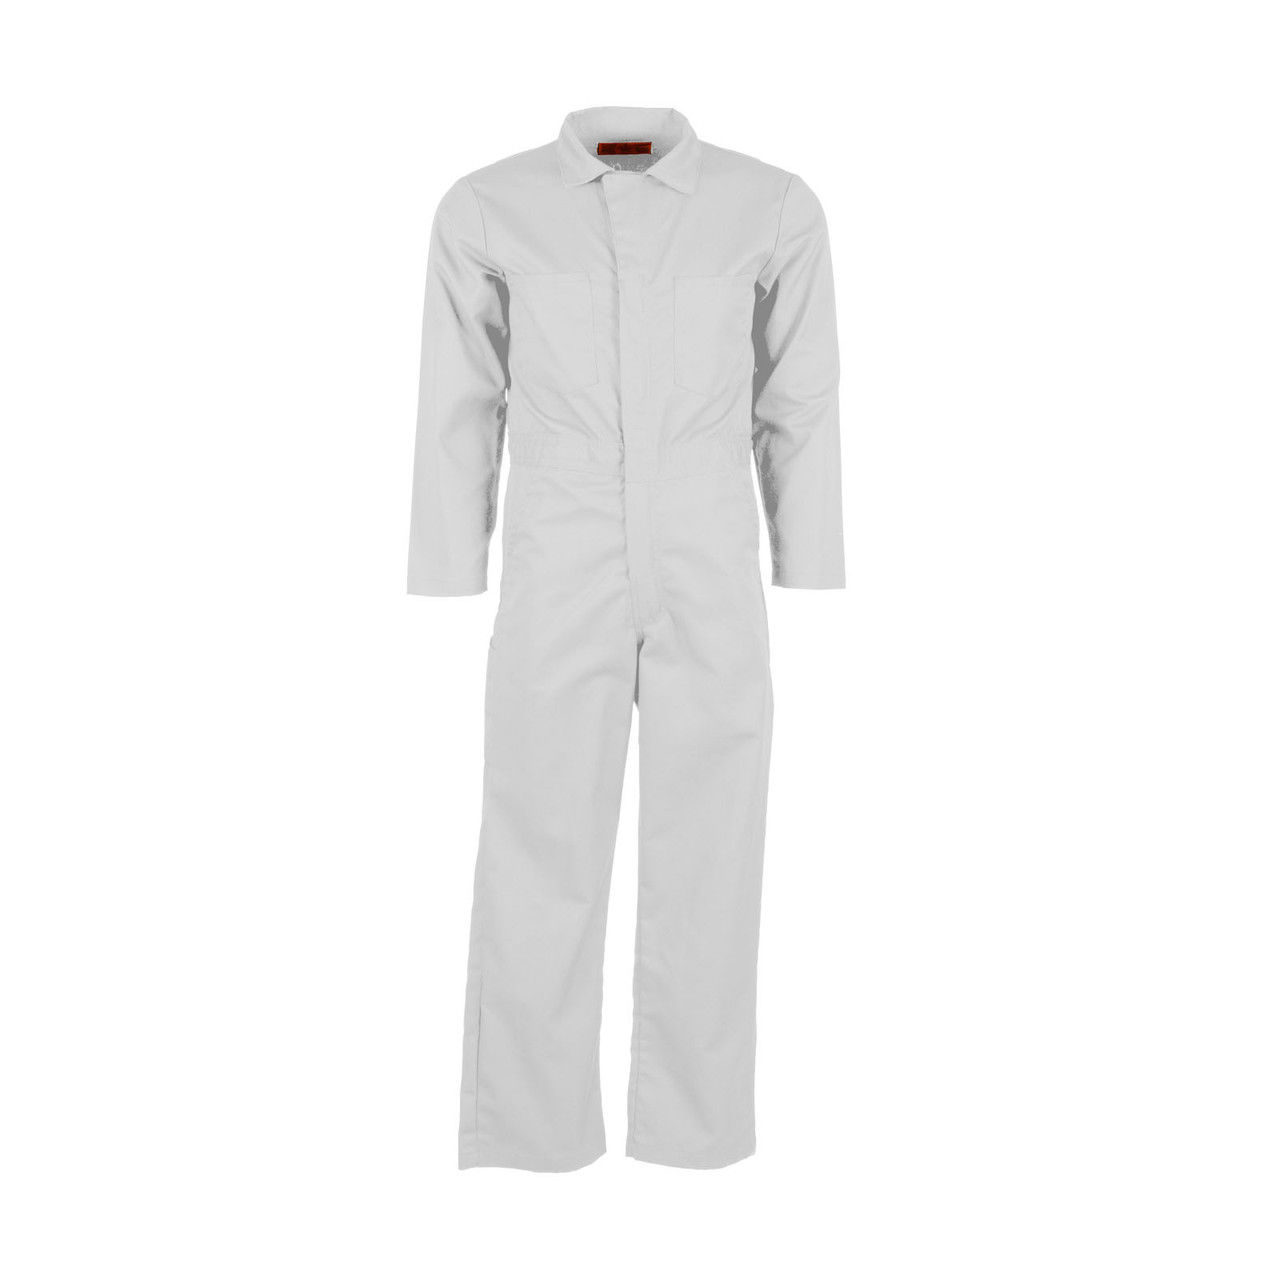 What are the shipping details for CV10WH white coveralls?